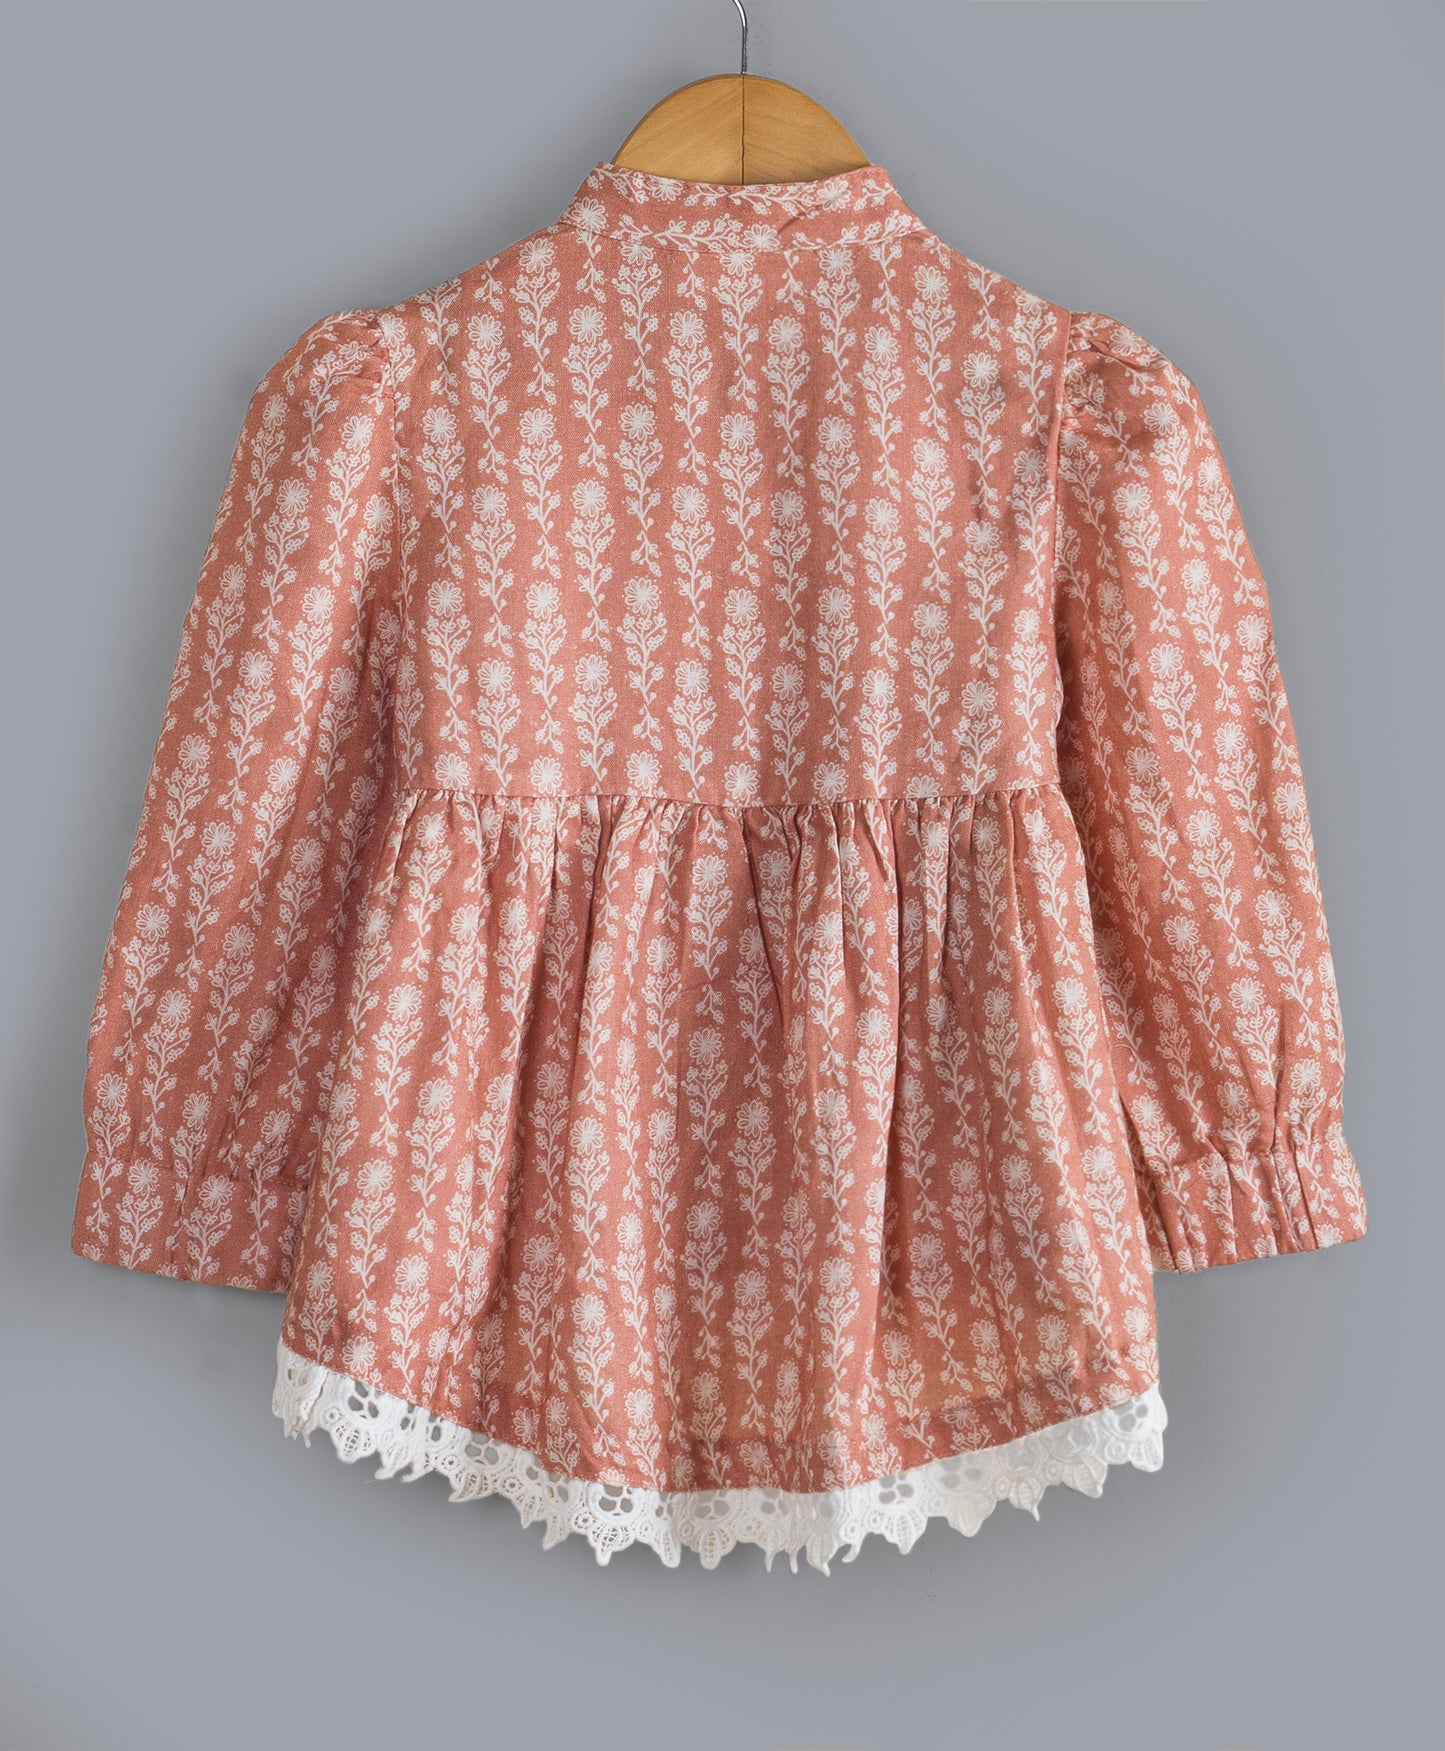 PEACH FLORAL TOP WITH LACE AT THE BOTTOM EDGE